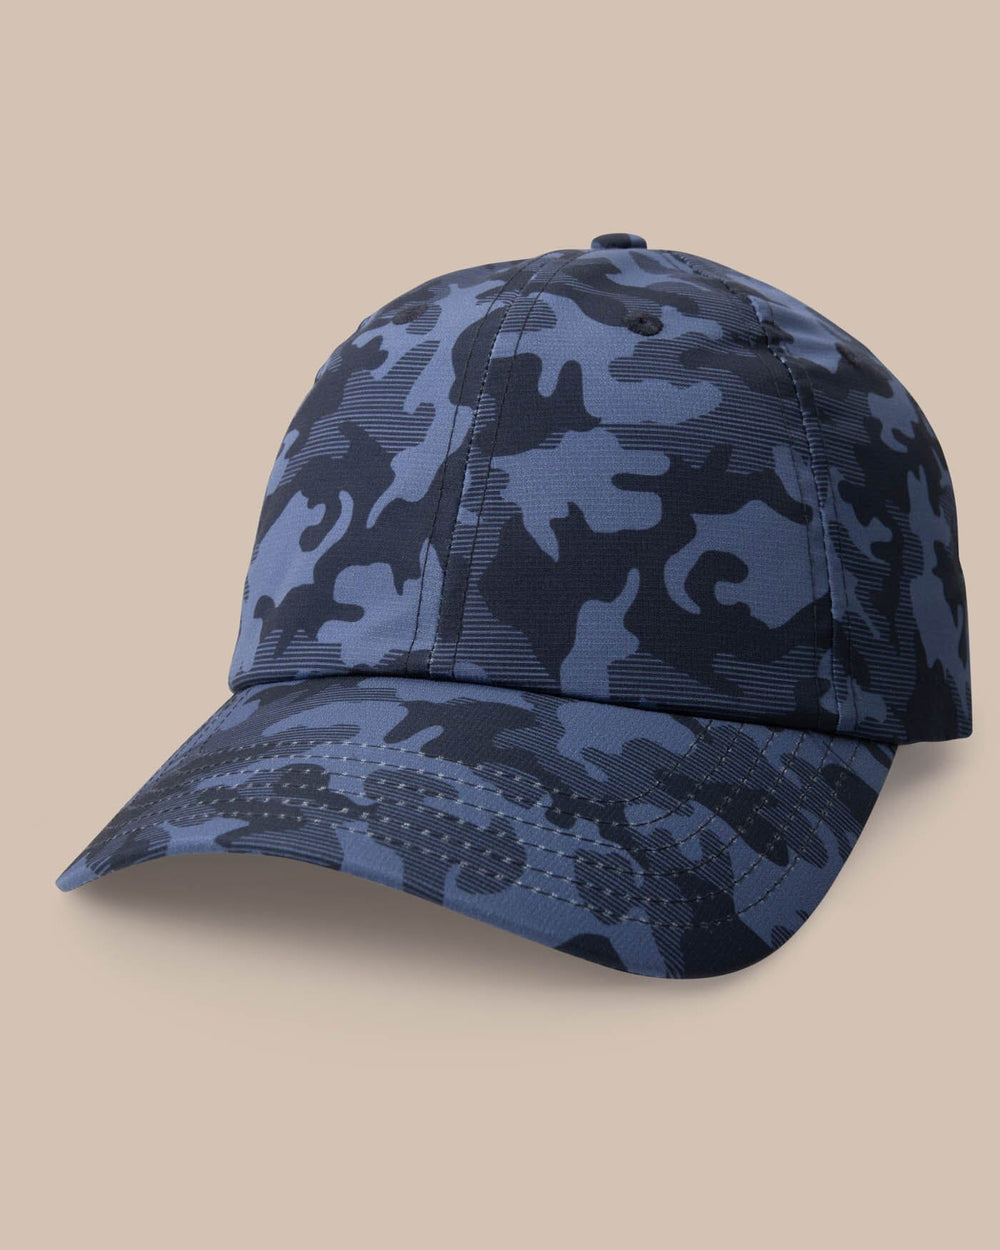 The front of the Camo Printed Performance Hat by Southern Tide - True Navy